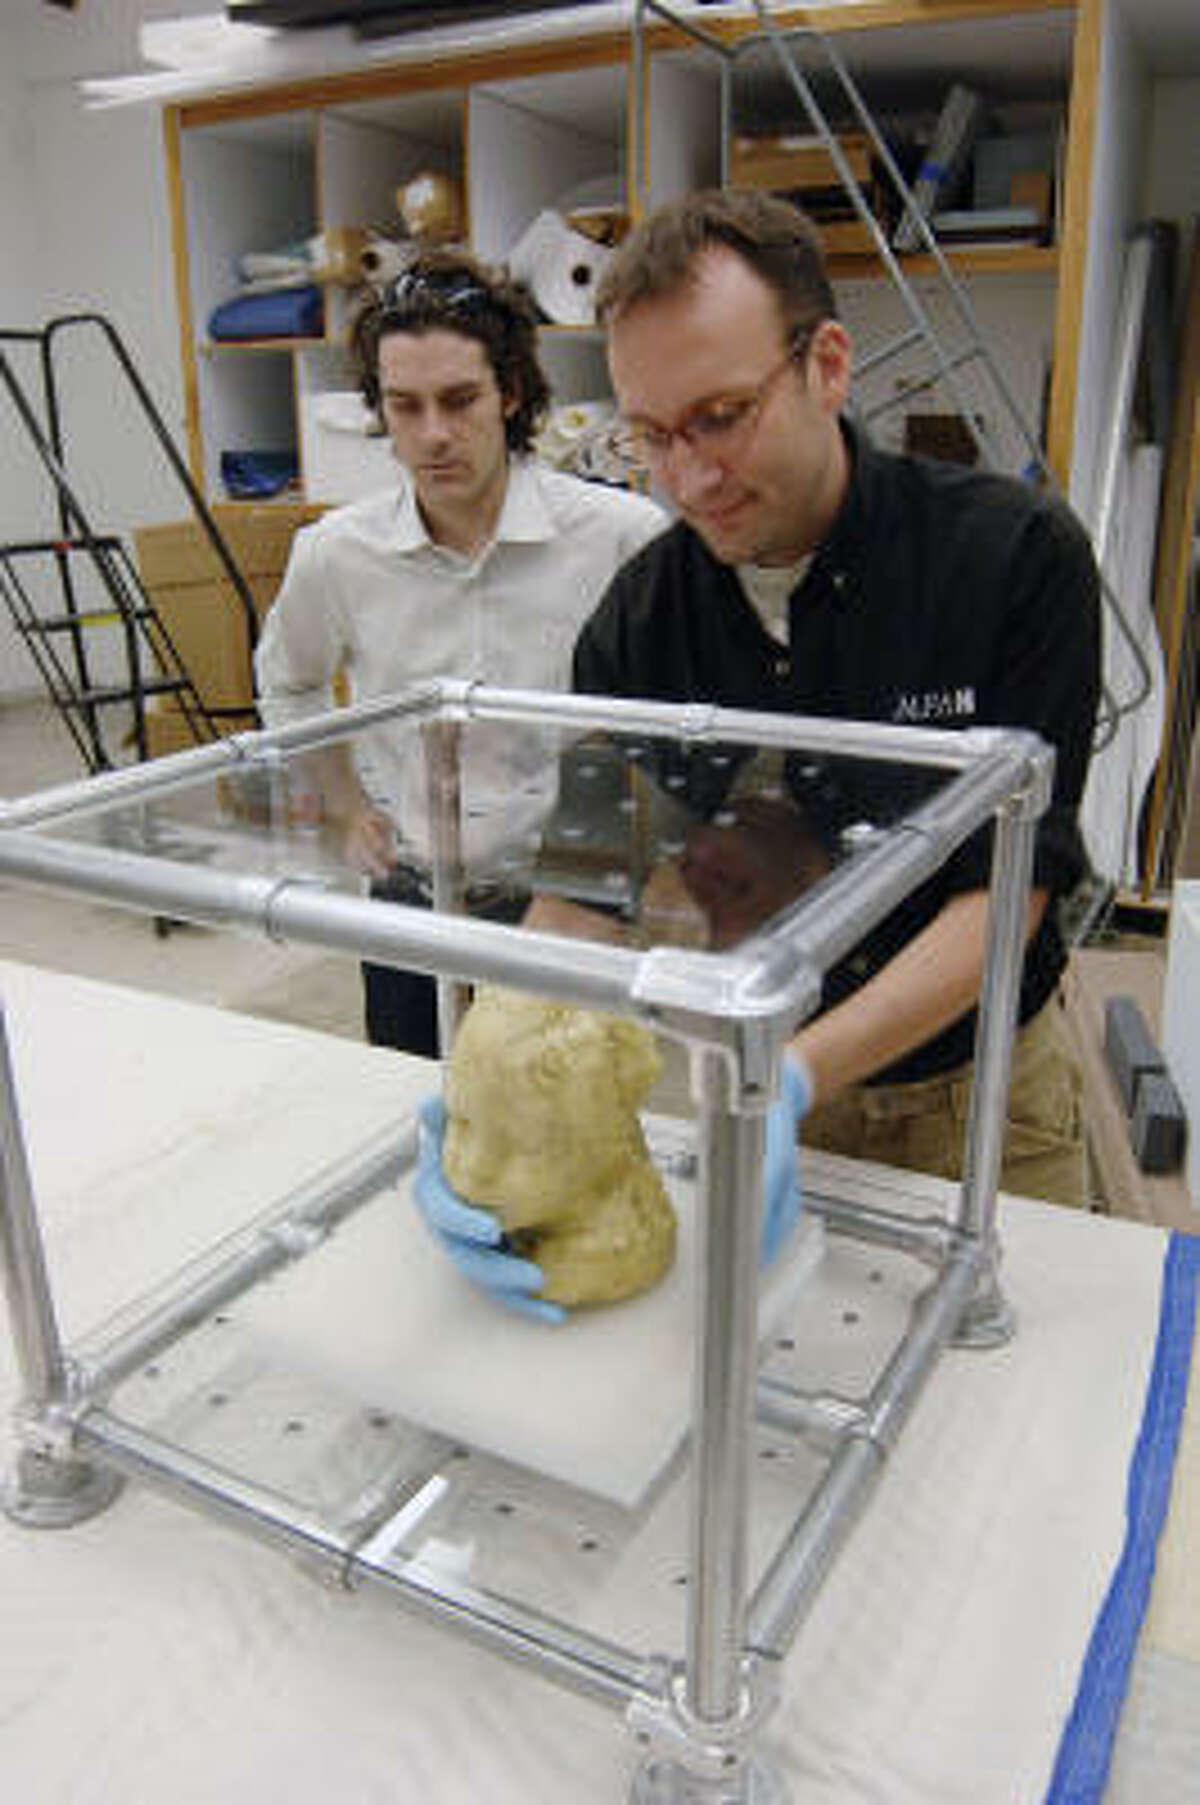 Matthew Wettergreen, left, a Rice University lecturer, supervises as Museum of Fine Arts, Houston, preparator Michael Crowder installs a wax-and-plaster sculpture into a working storage-system prototype developed by Wettergreen's students. Because the structure is made of Plexiglas and a steel armature, it allows the artwork to remain visible while in storage.